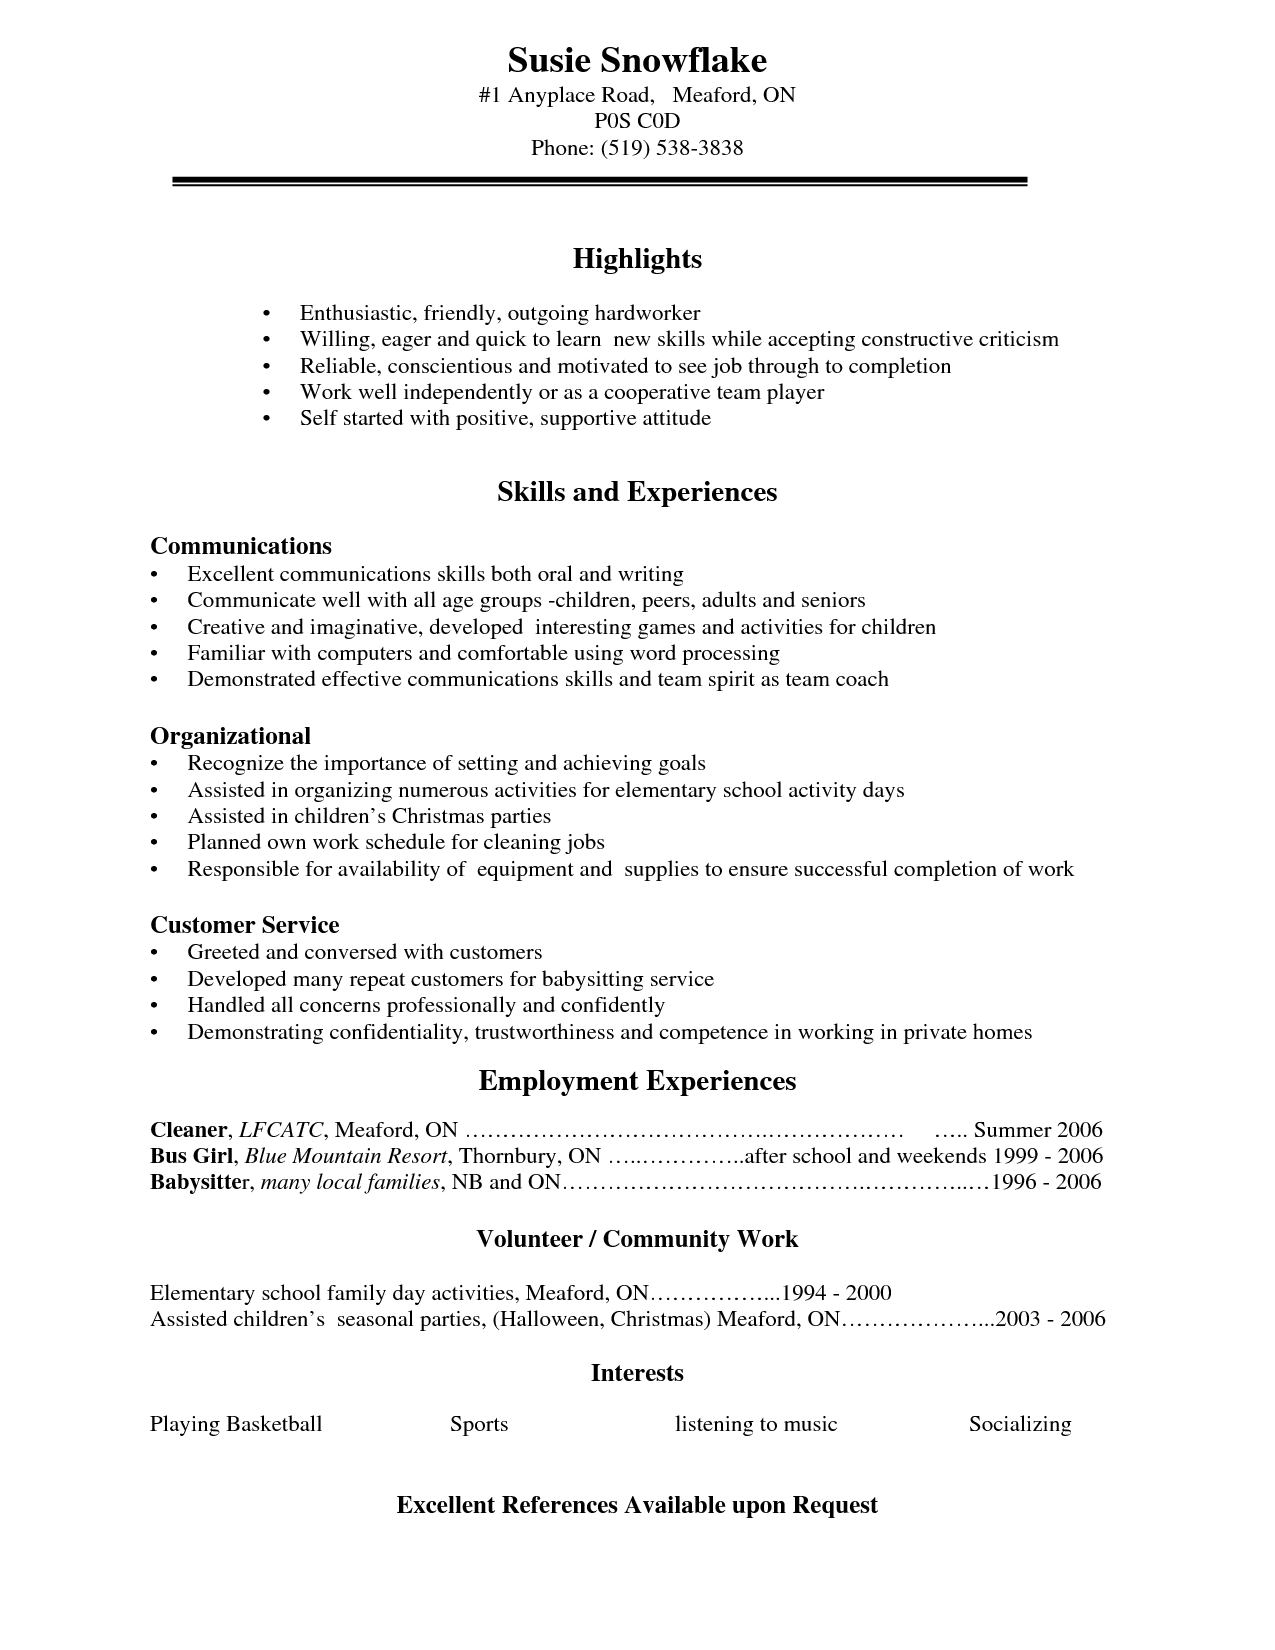 Resume Format For High School Students 